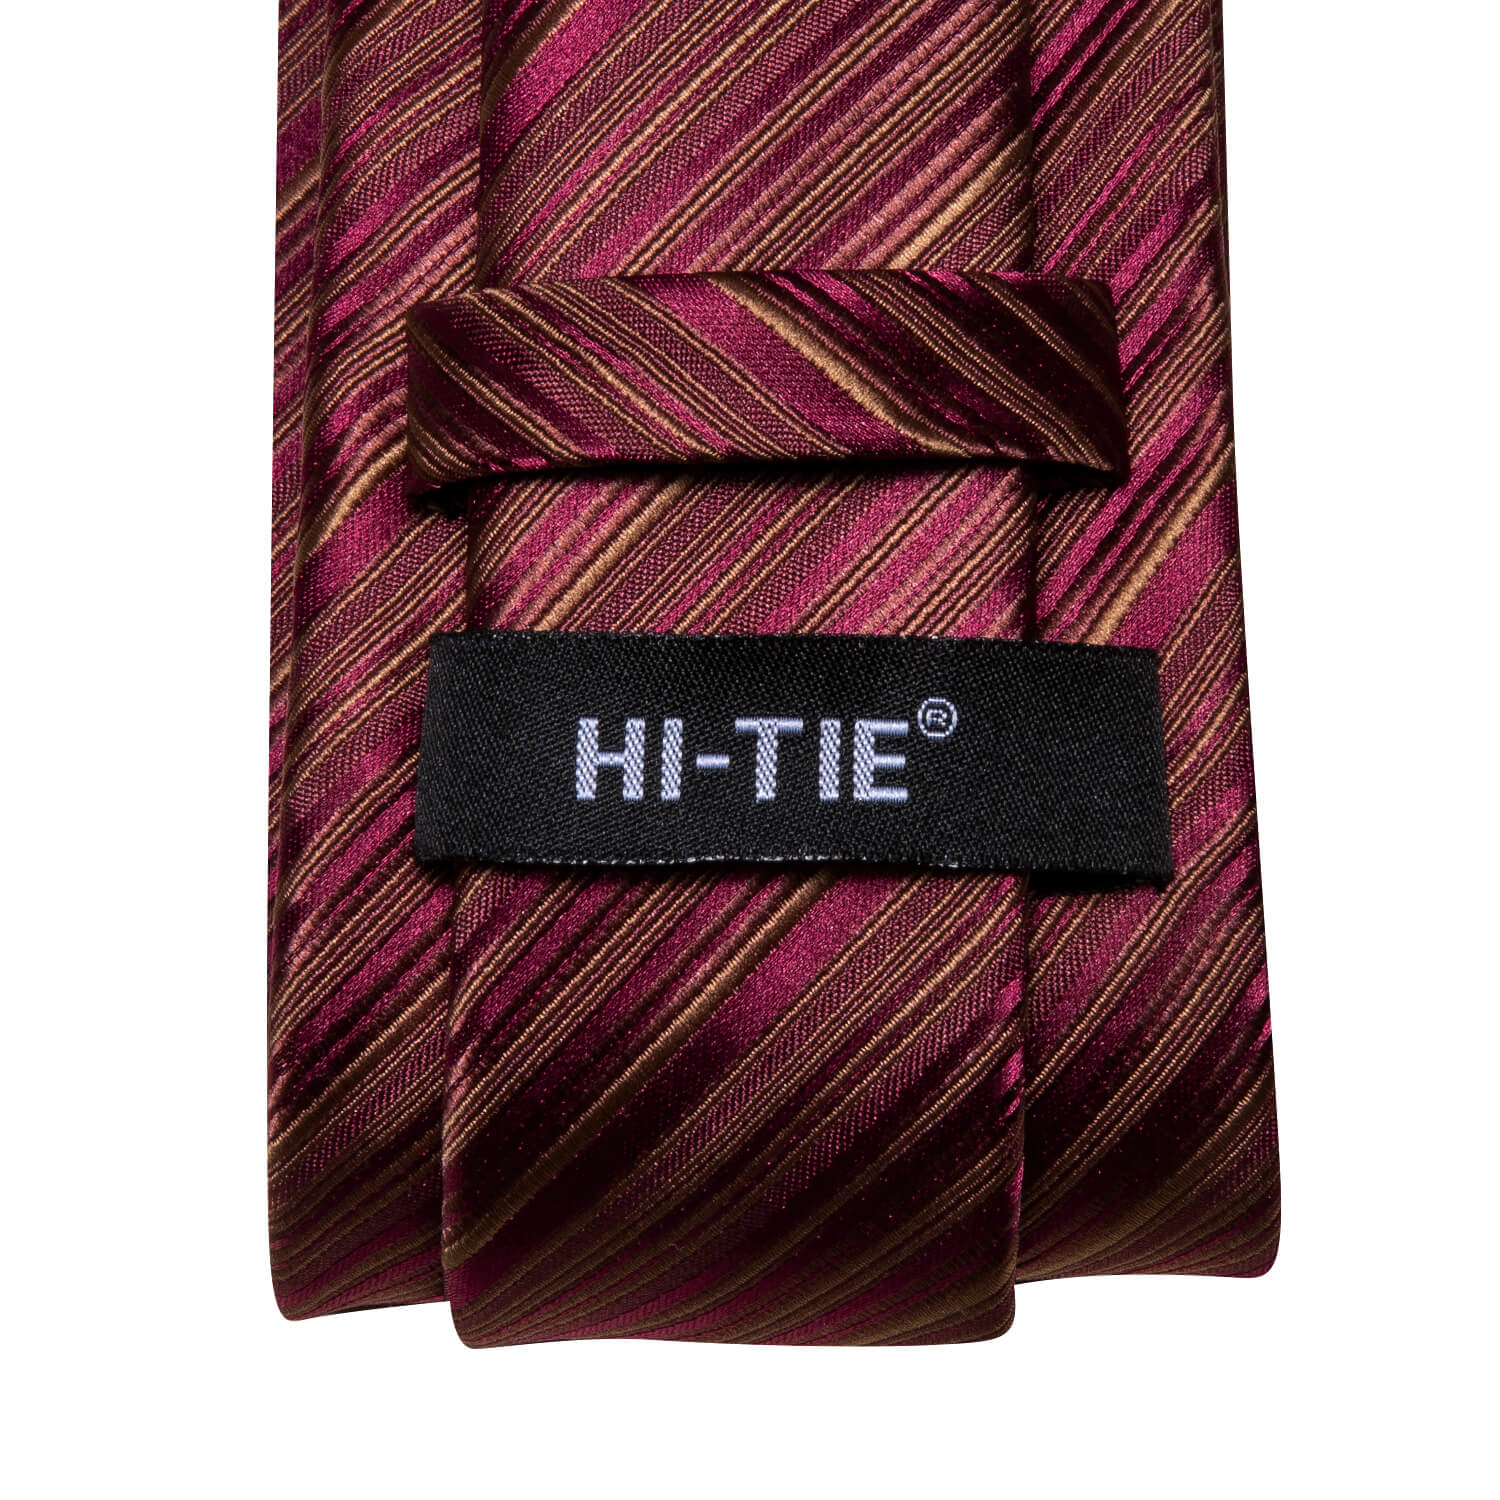 Hi-Tie Striped Wine Red Tie with Pocket Square and Cufflinks